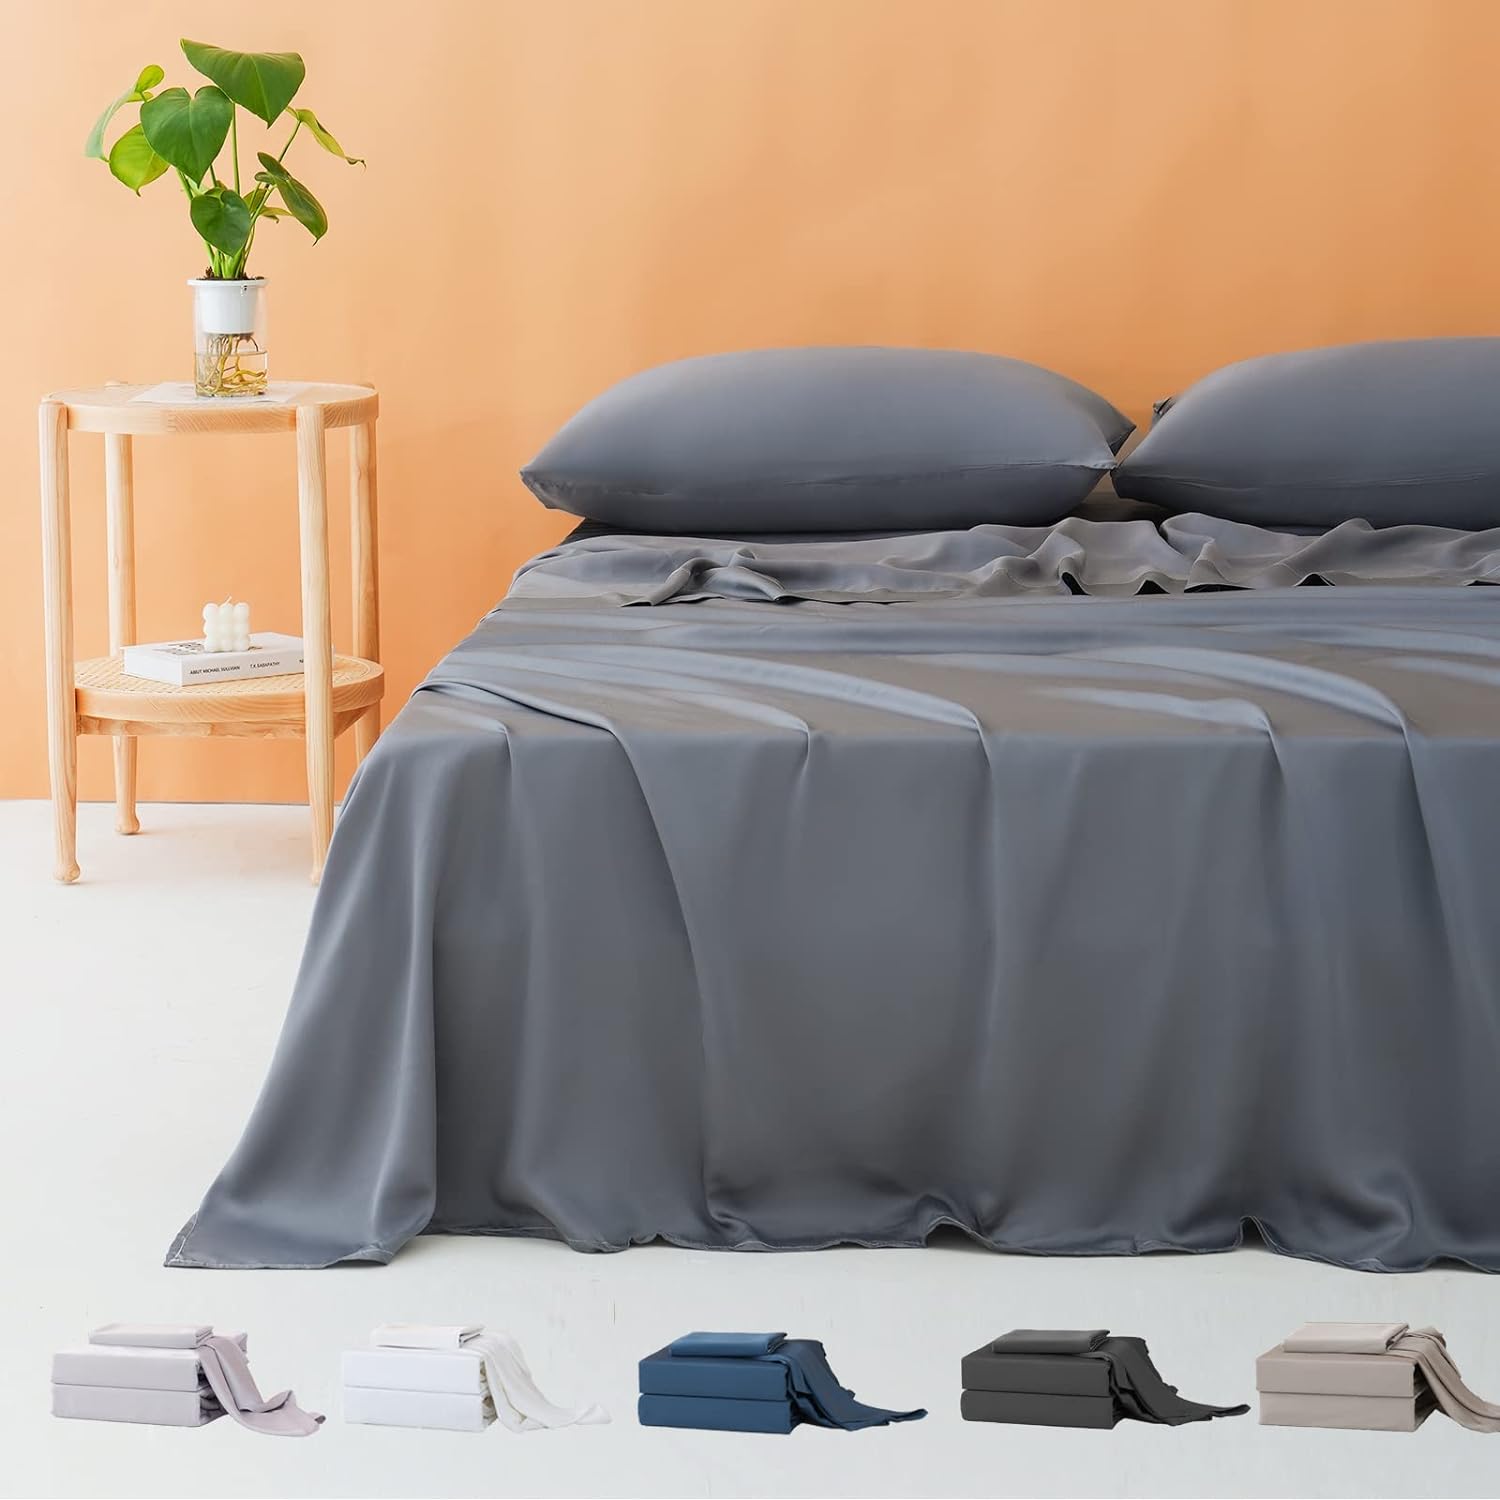 Bedbay Grey Queen Bed Sheet Set,100% Bamboo Viscose Cooling Sheet Set for Hot Sleepers,16 Deep Pocket Queen Sheet Set,Luxury Silky Soft Queen Sheet Set 4 Pieces for All Season- Charcoal,Queen